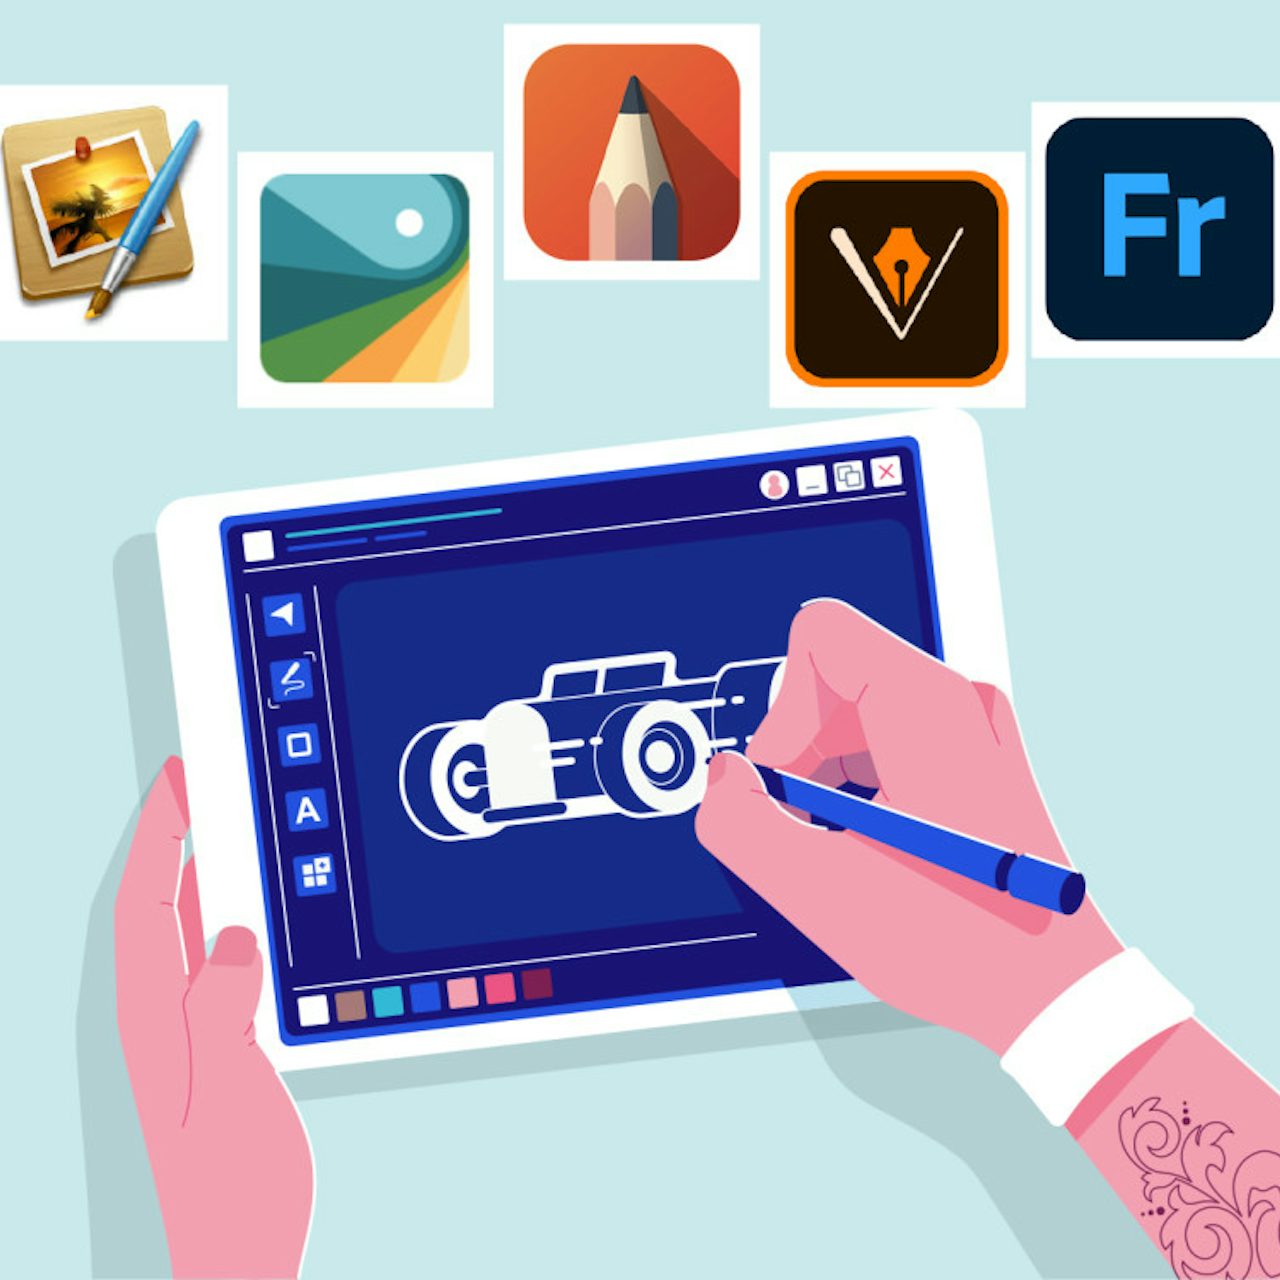 Drawing apps for pc